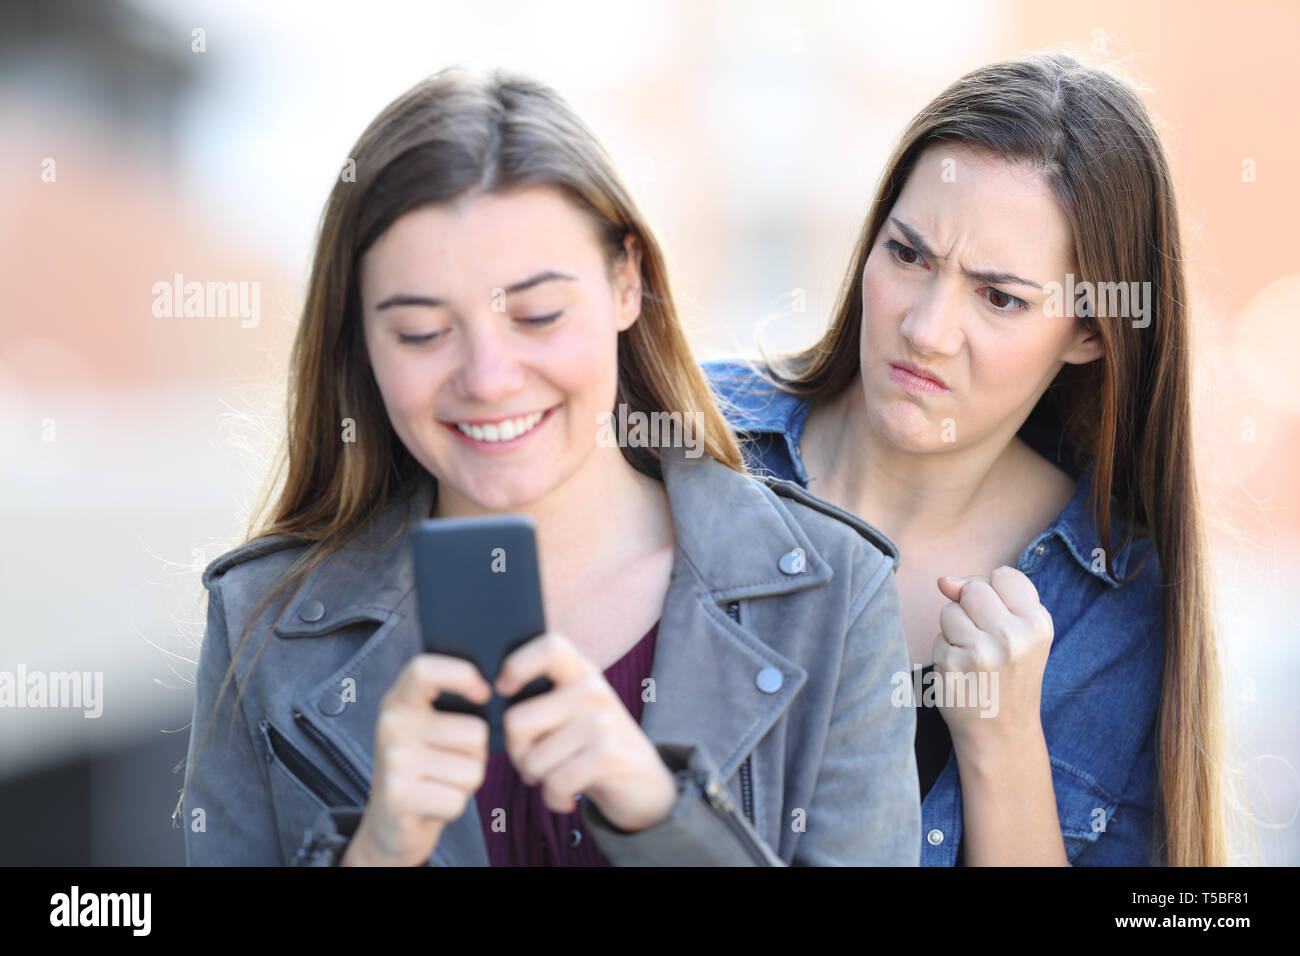 Angry girl spying the smart phone of a friend in the street Stock Photo